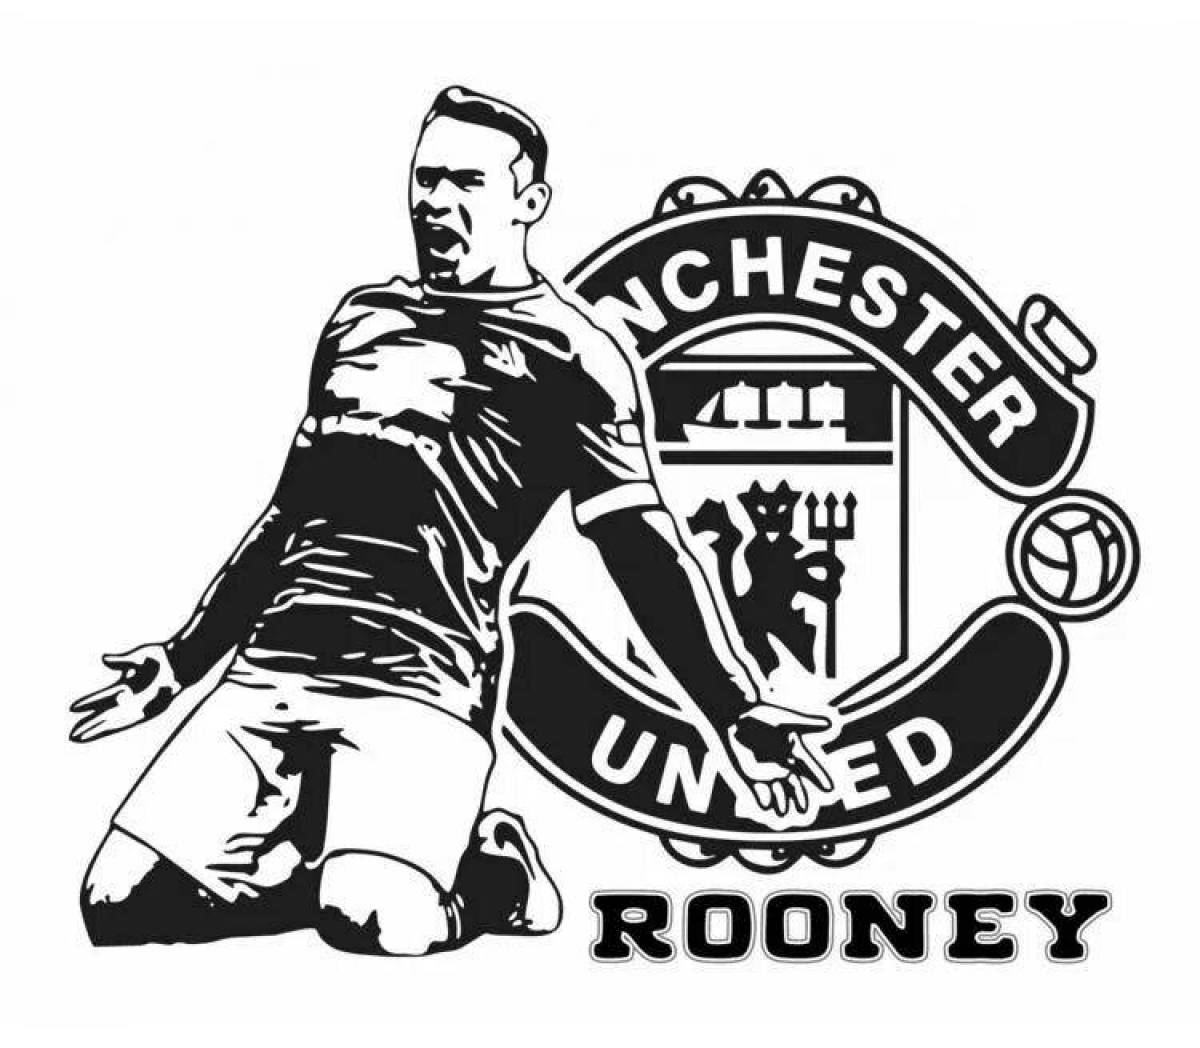 Manchester United's brightly colored coloring page